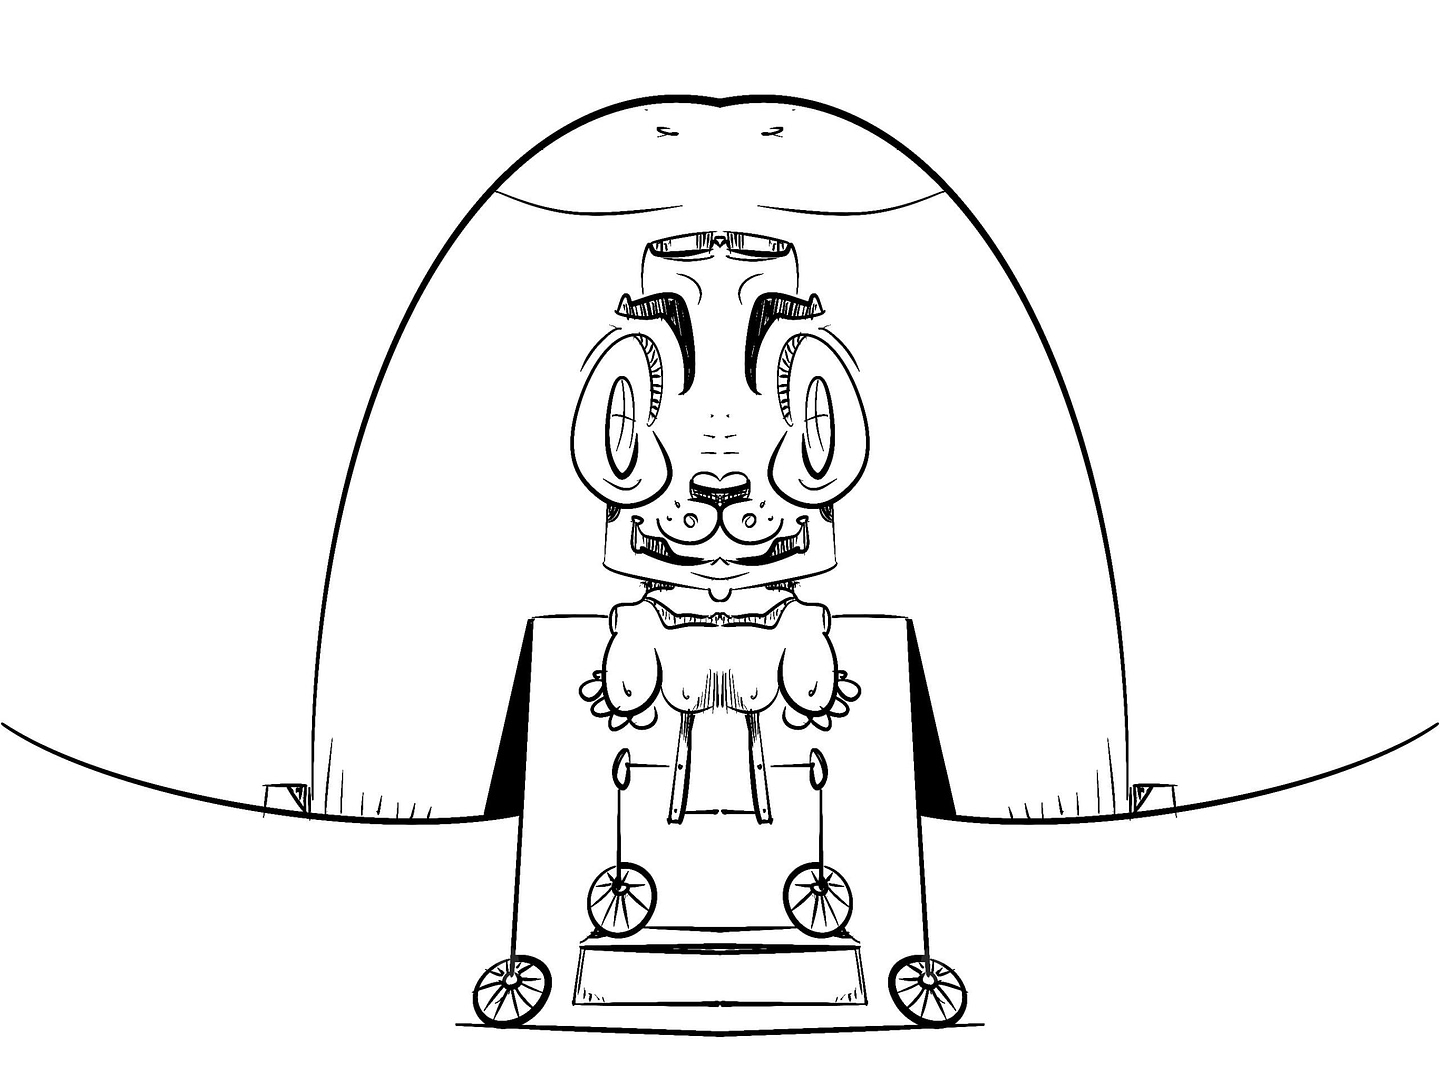 Animal like character attached to bicycle wheels